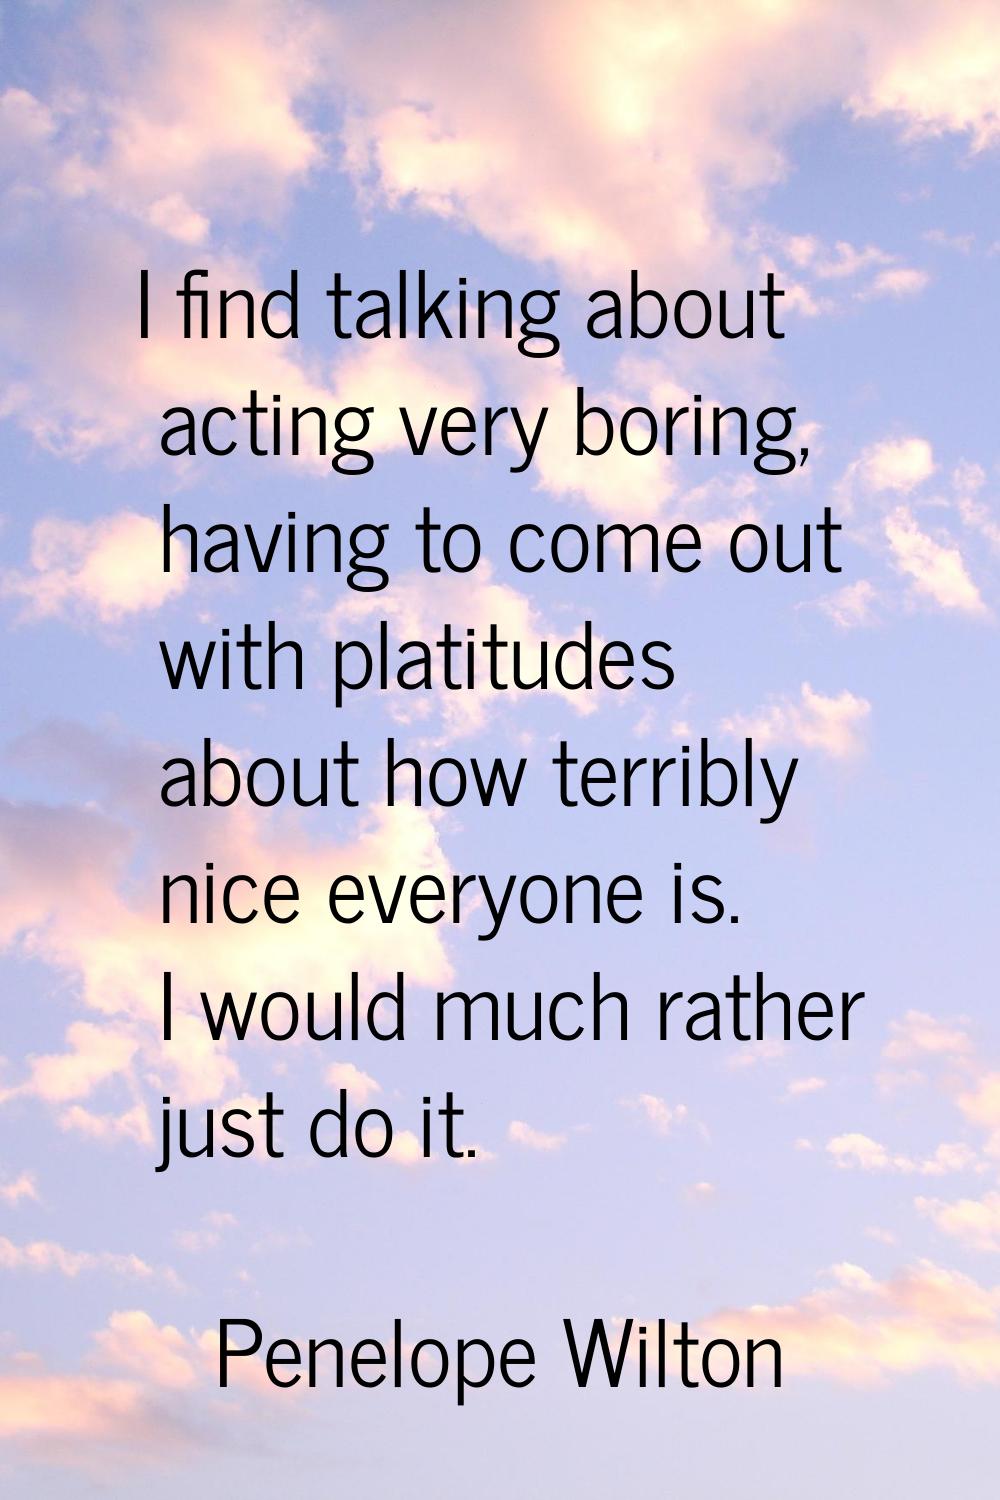 I find talking about acting very boring, having to come out with platitudes about how terribly nice